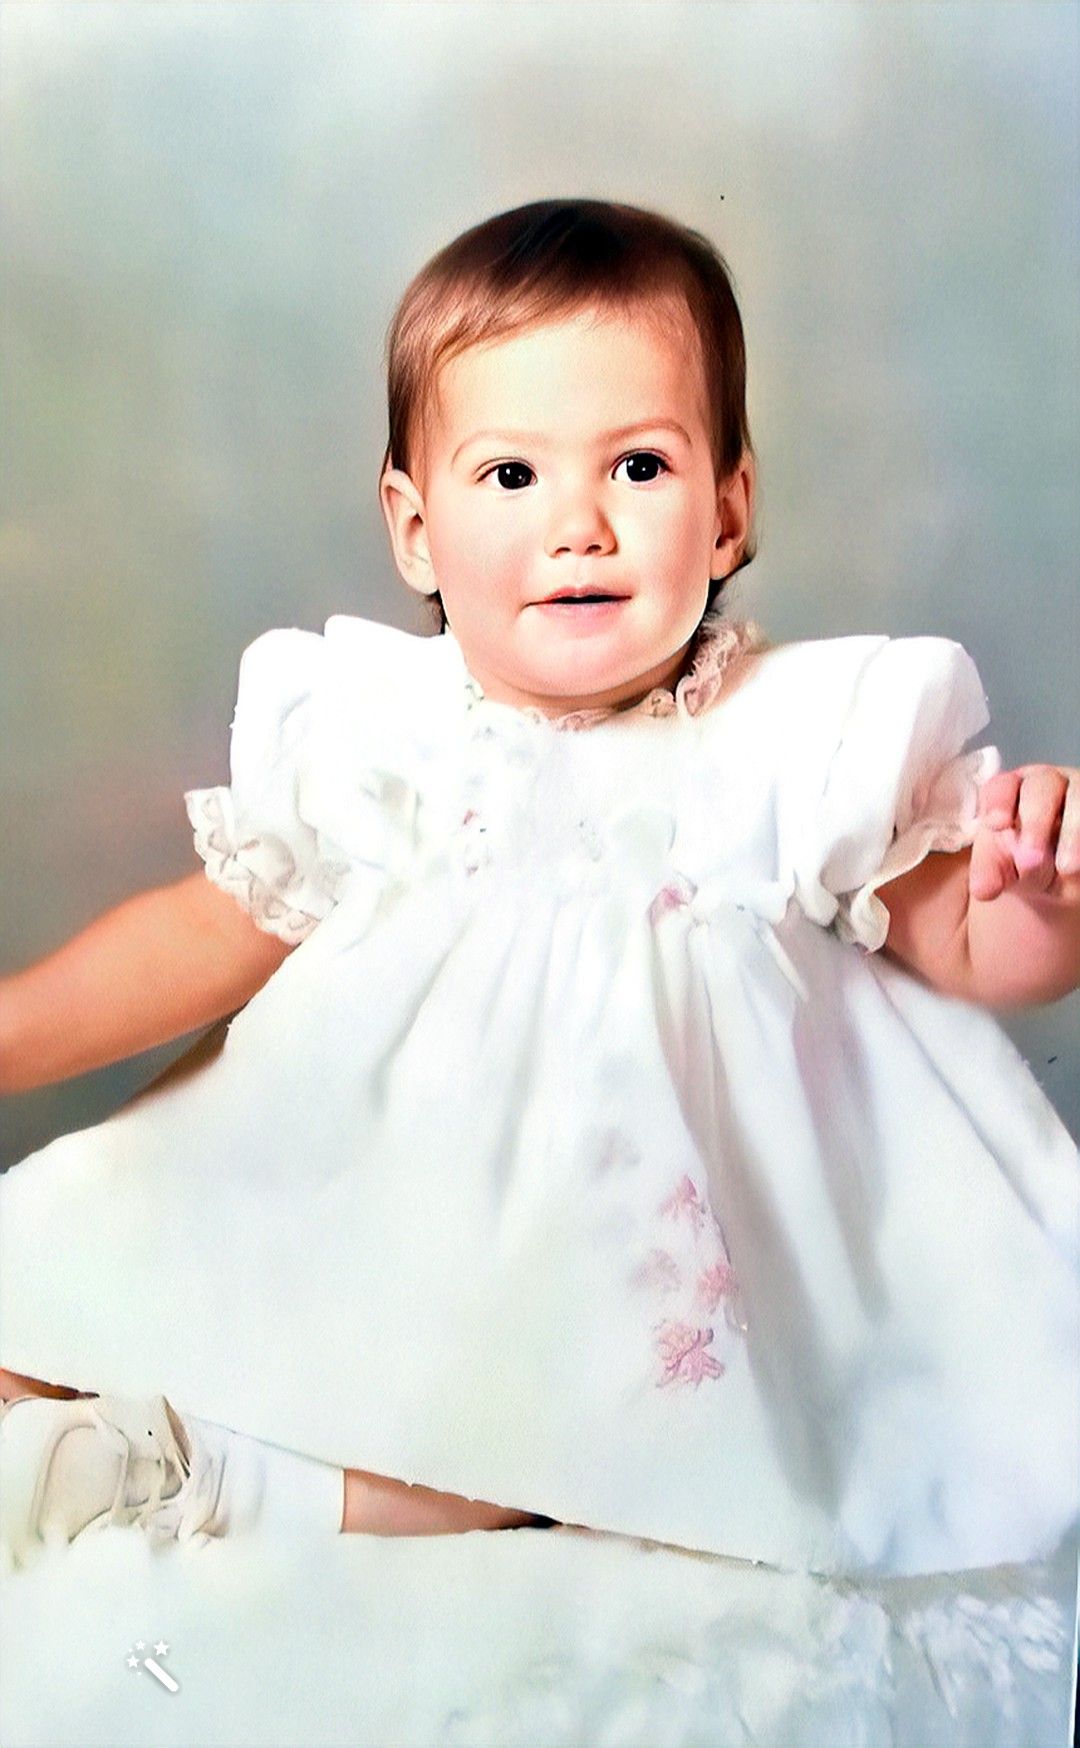 Winona as a baby. Photo enhanced and colors restored by MyHeritage